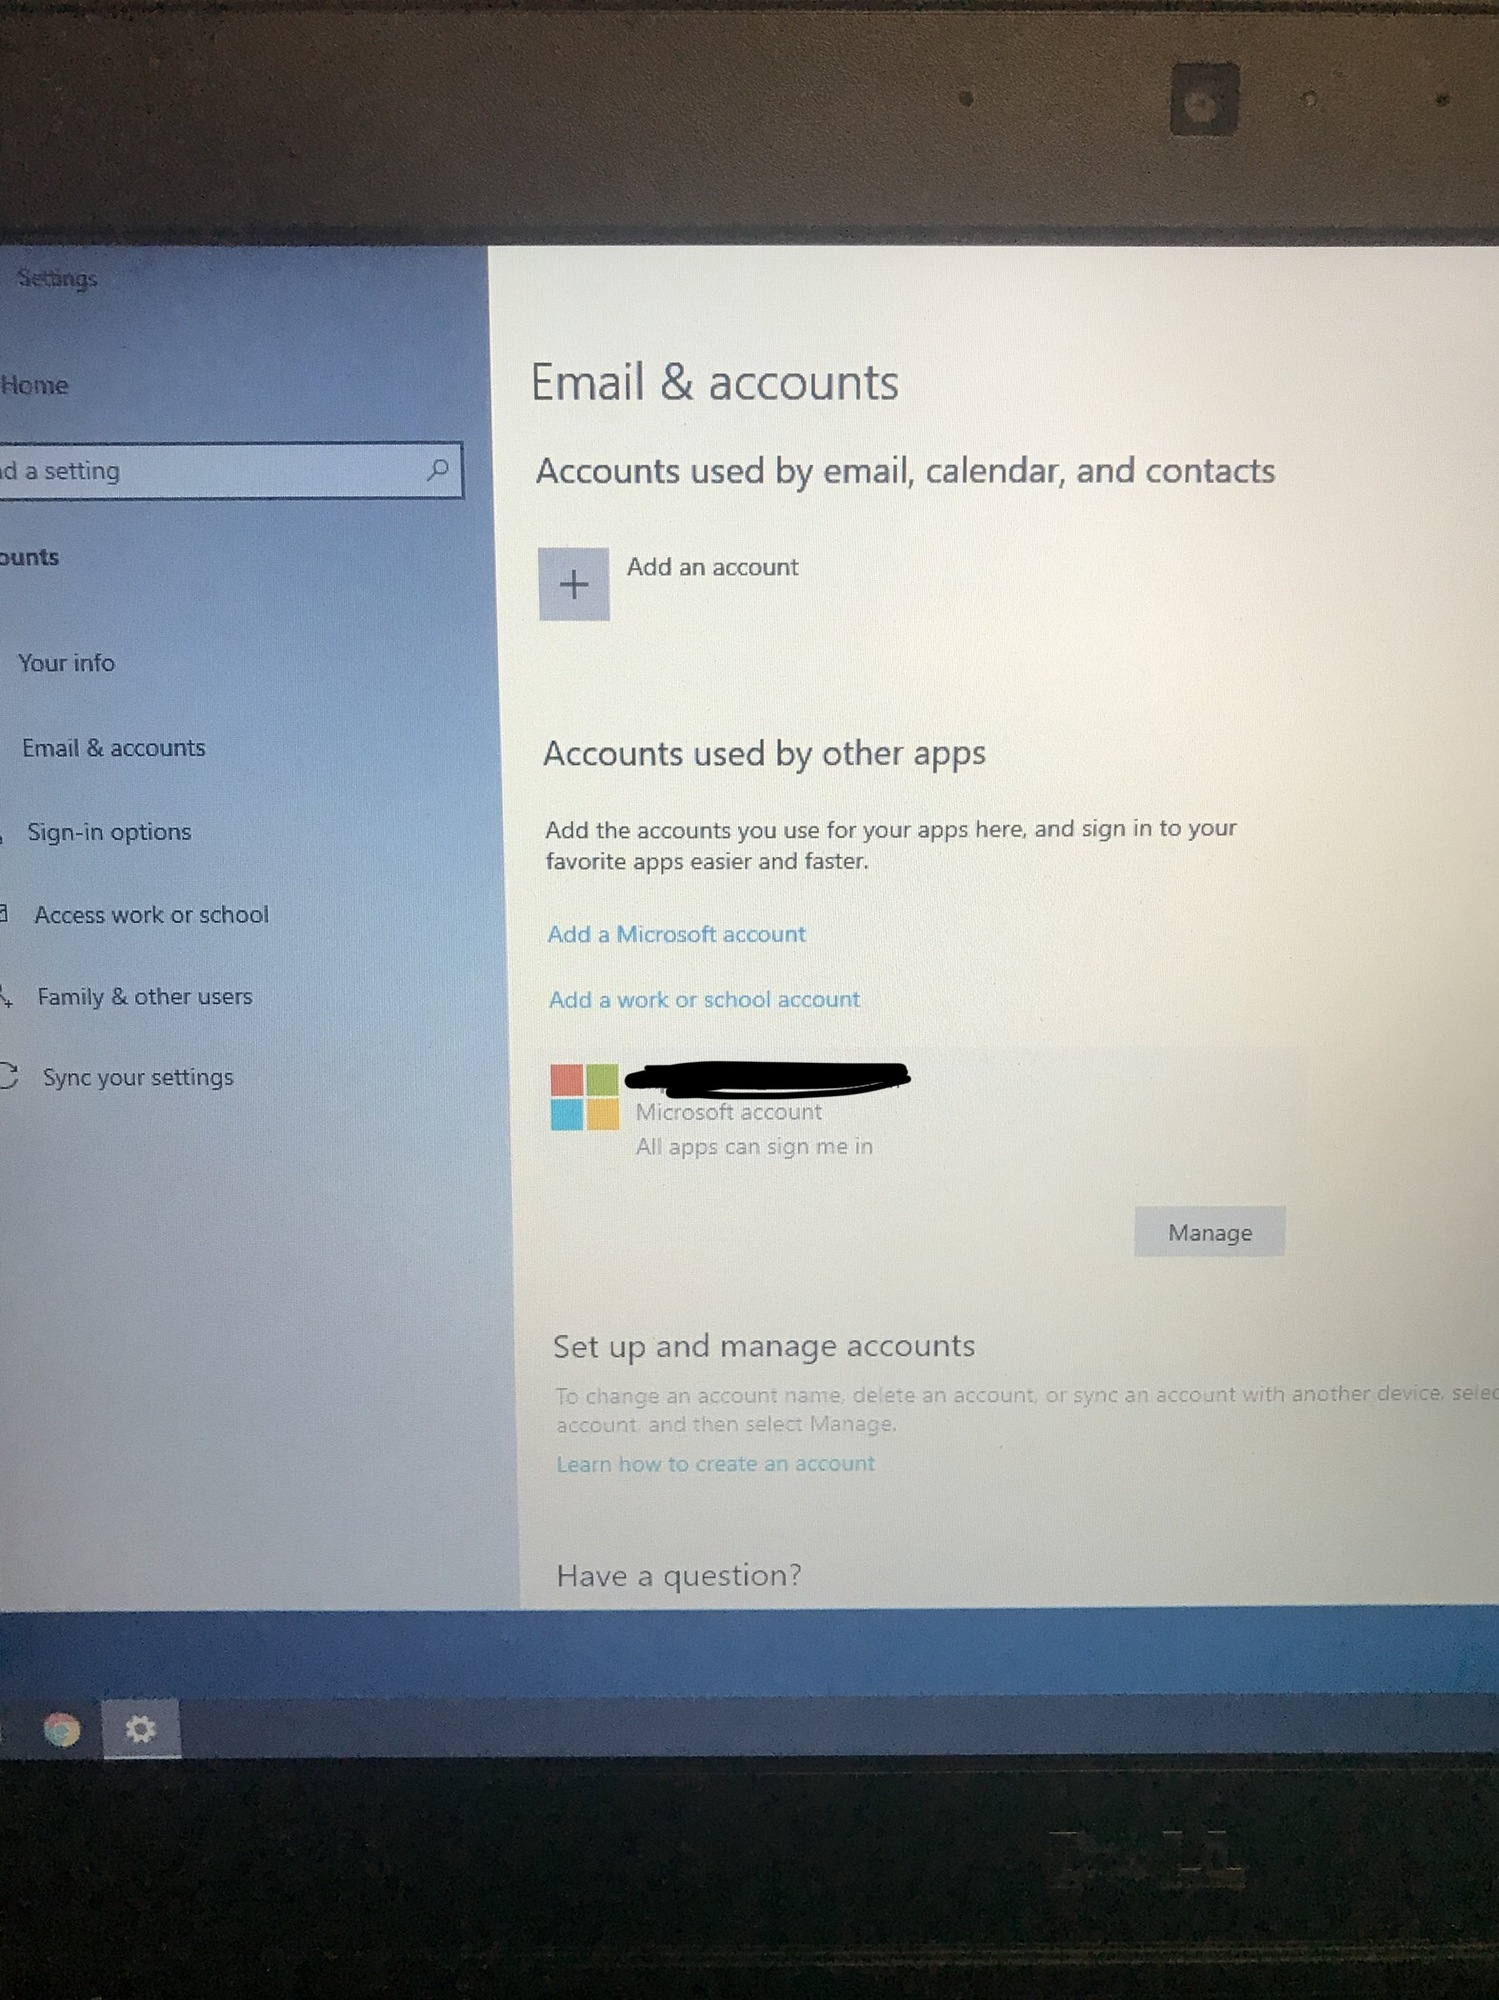 Removing an email account completely from a windows 10 profile f94d5ebf-e3af-46e9-bfb6-24a8a9bb94c4?upload=true.jpg